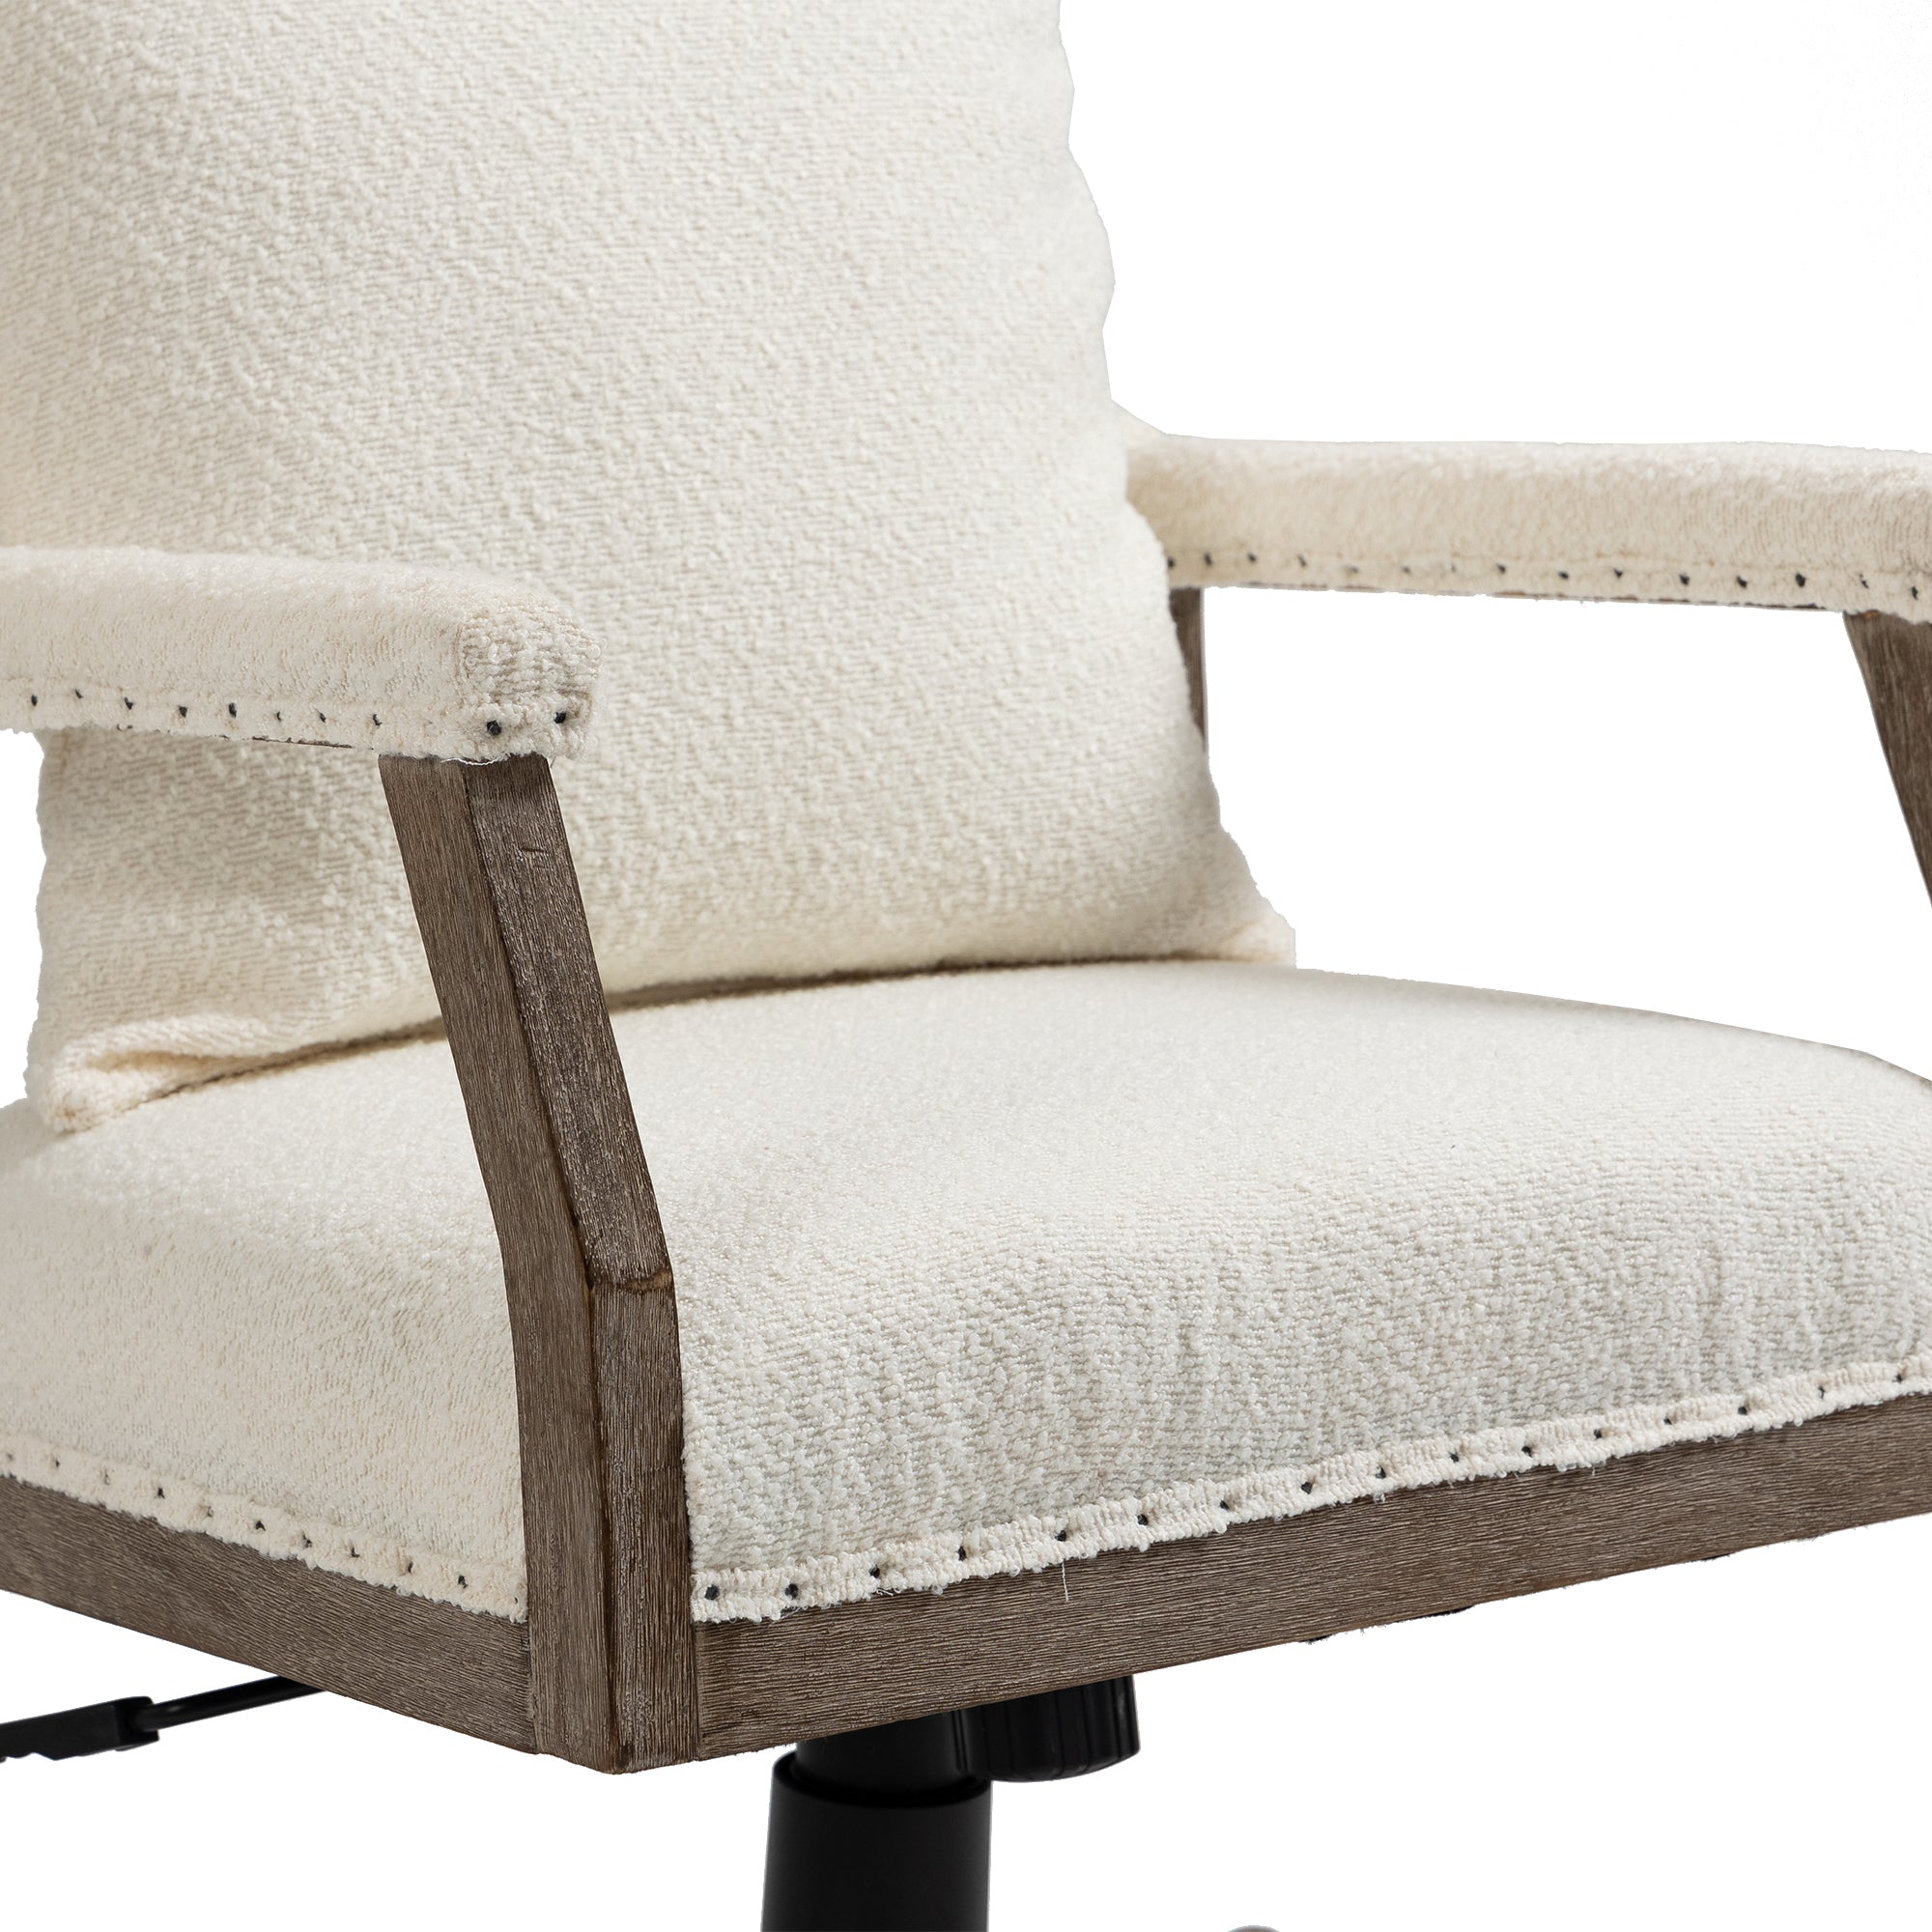 Office Chair Adjustable Swivel Chair Fabric Seat Home Study Chair - Beige